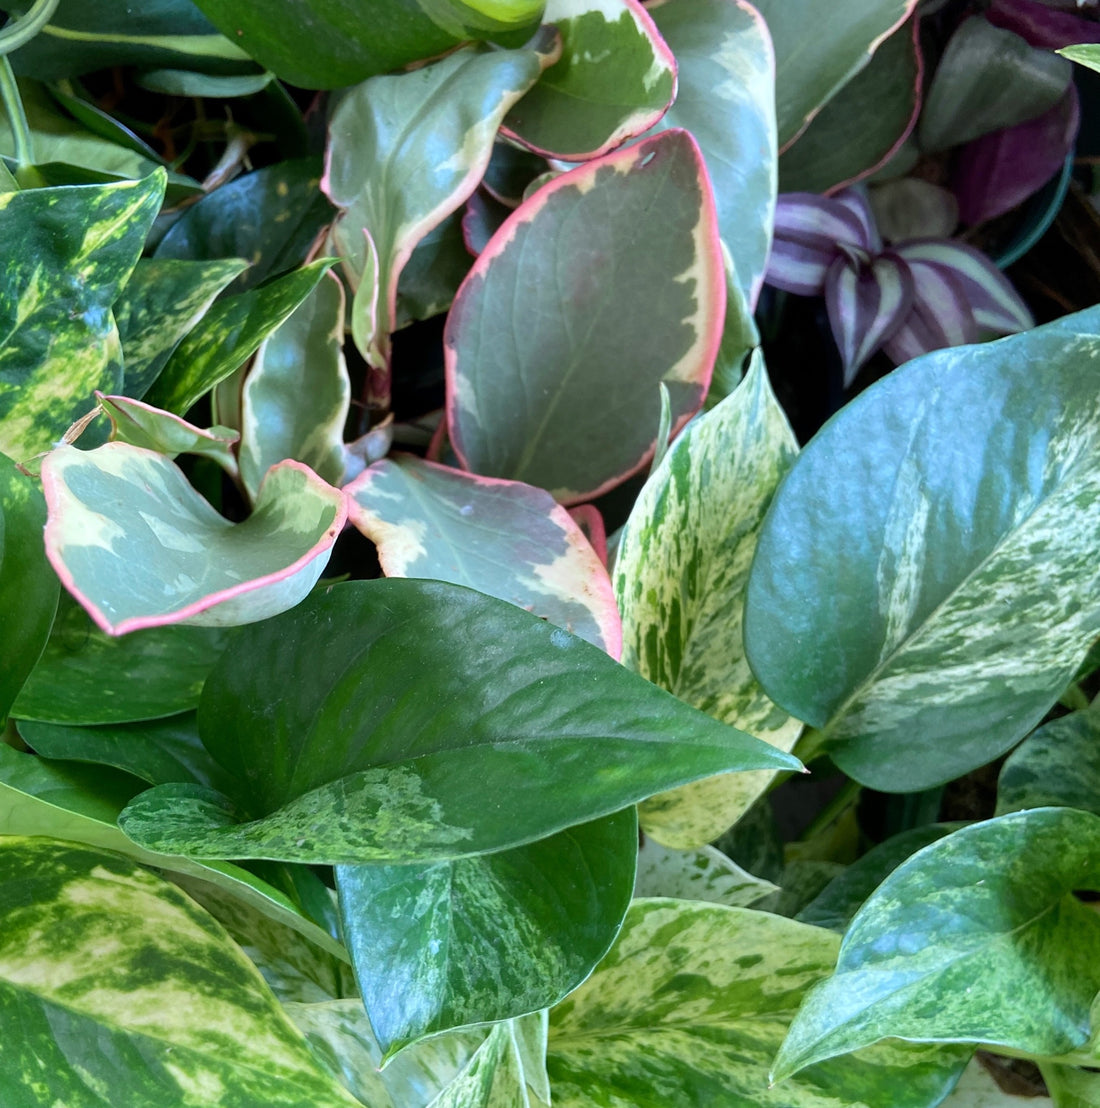 The plant variegation craze: Where to find them and how to keep them colorful!